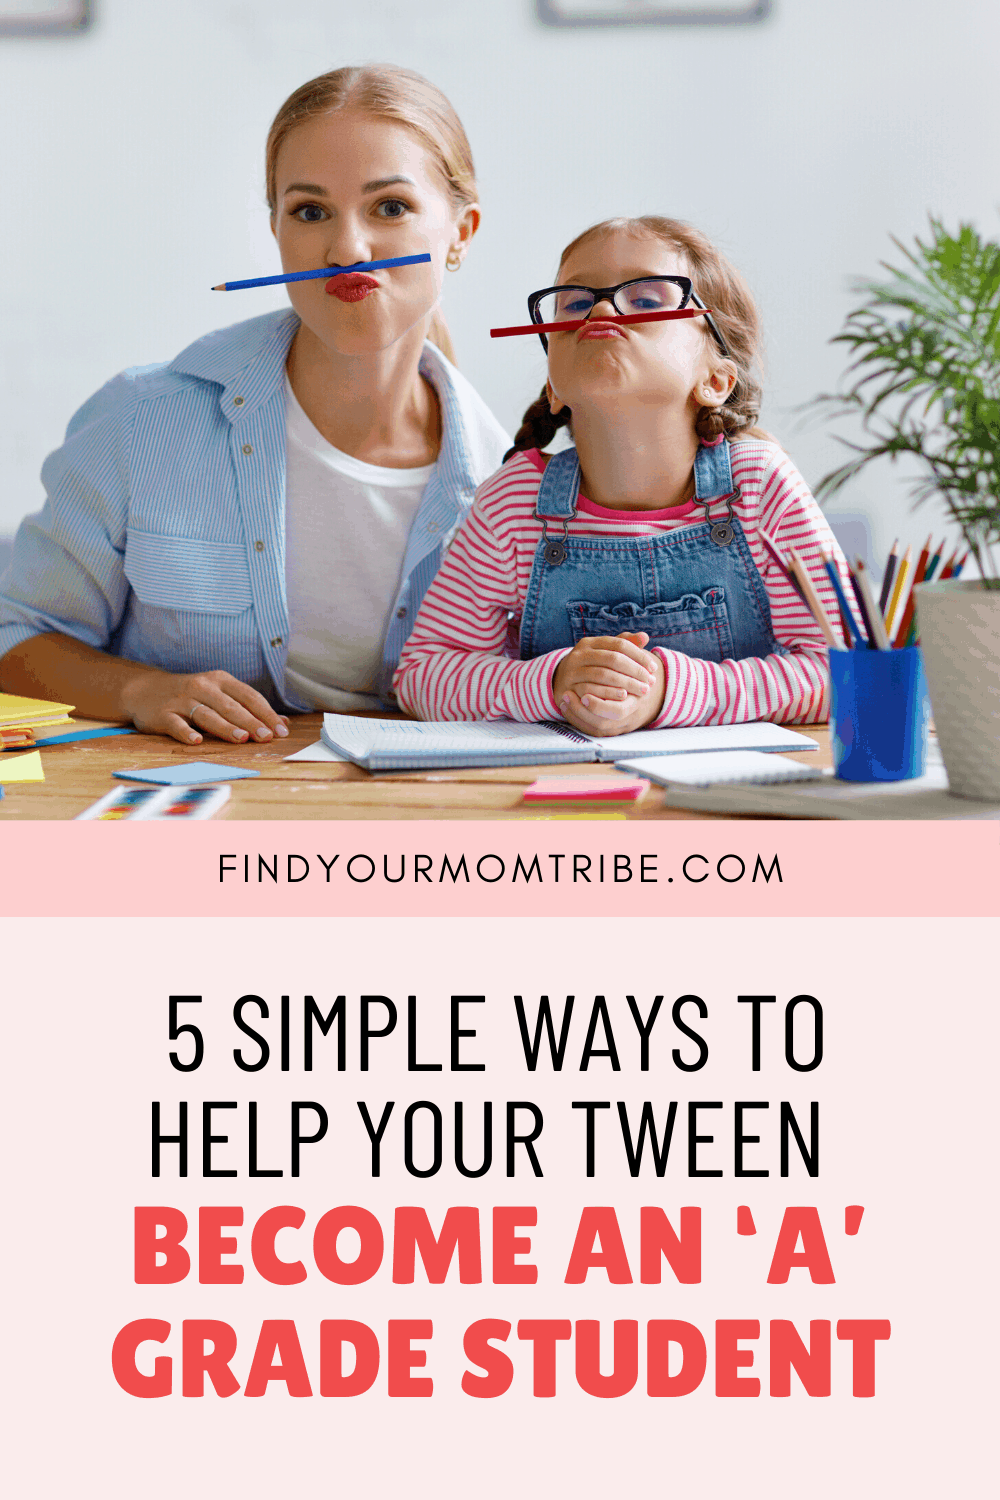 Pinterest 5 Simple Ways To Help Your Tween Become An ‘A’ Grade Student